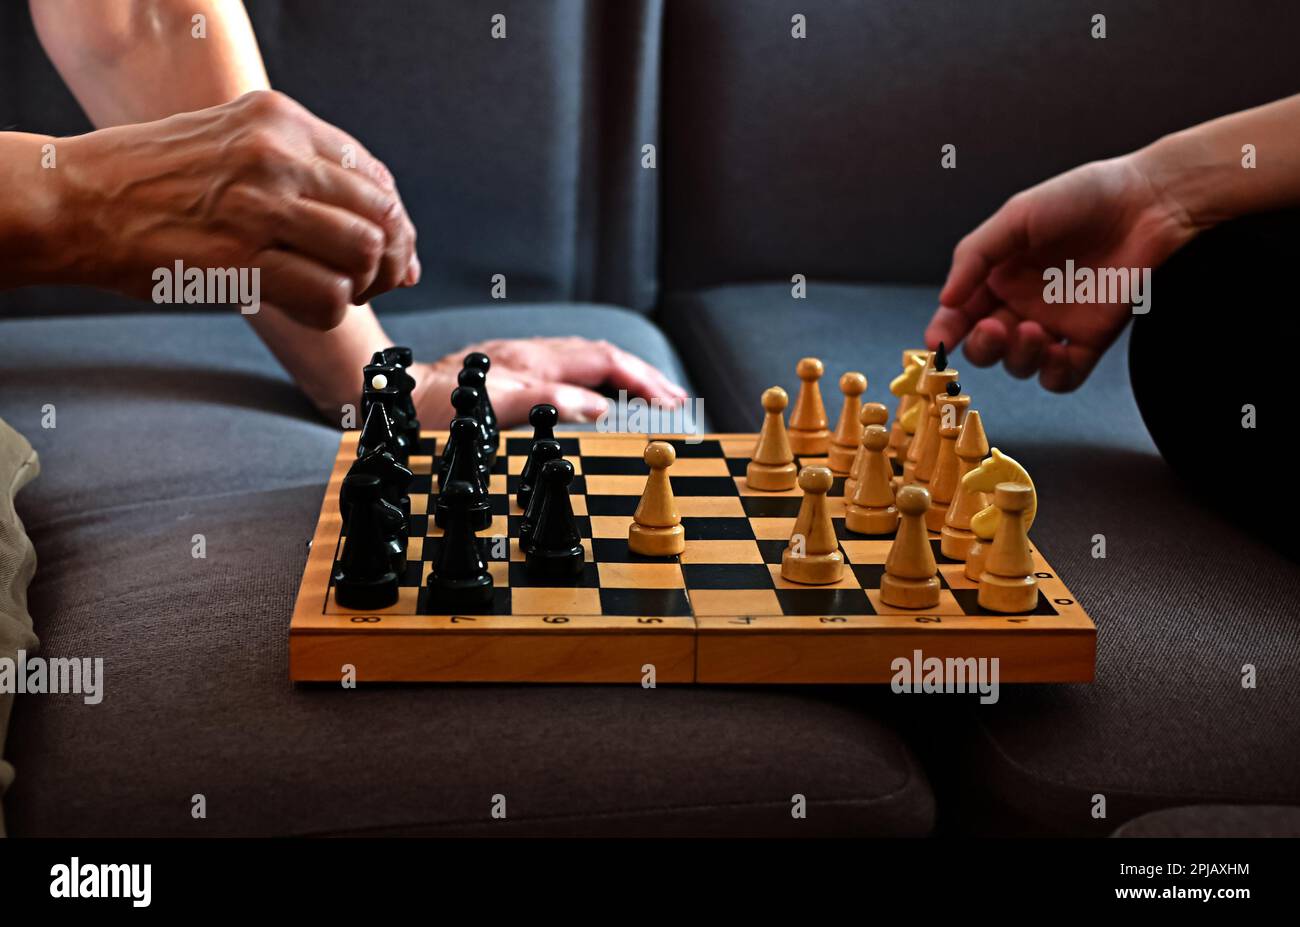 Grandmother playing chess with her granddaughter at home. Strategy and planning concept. Activities for seniors, elderly active lifestyle, older peopl Stock Photo